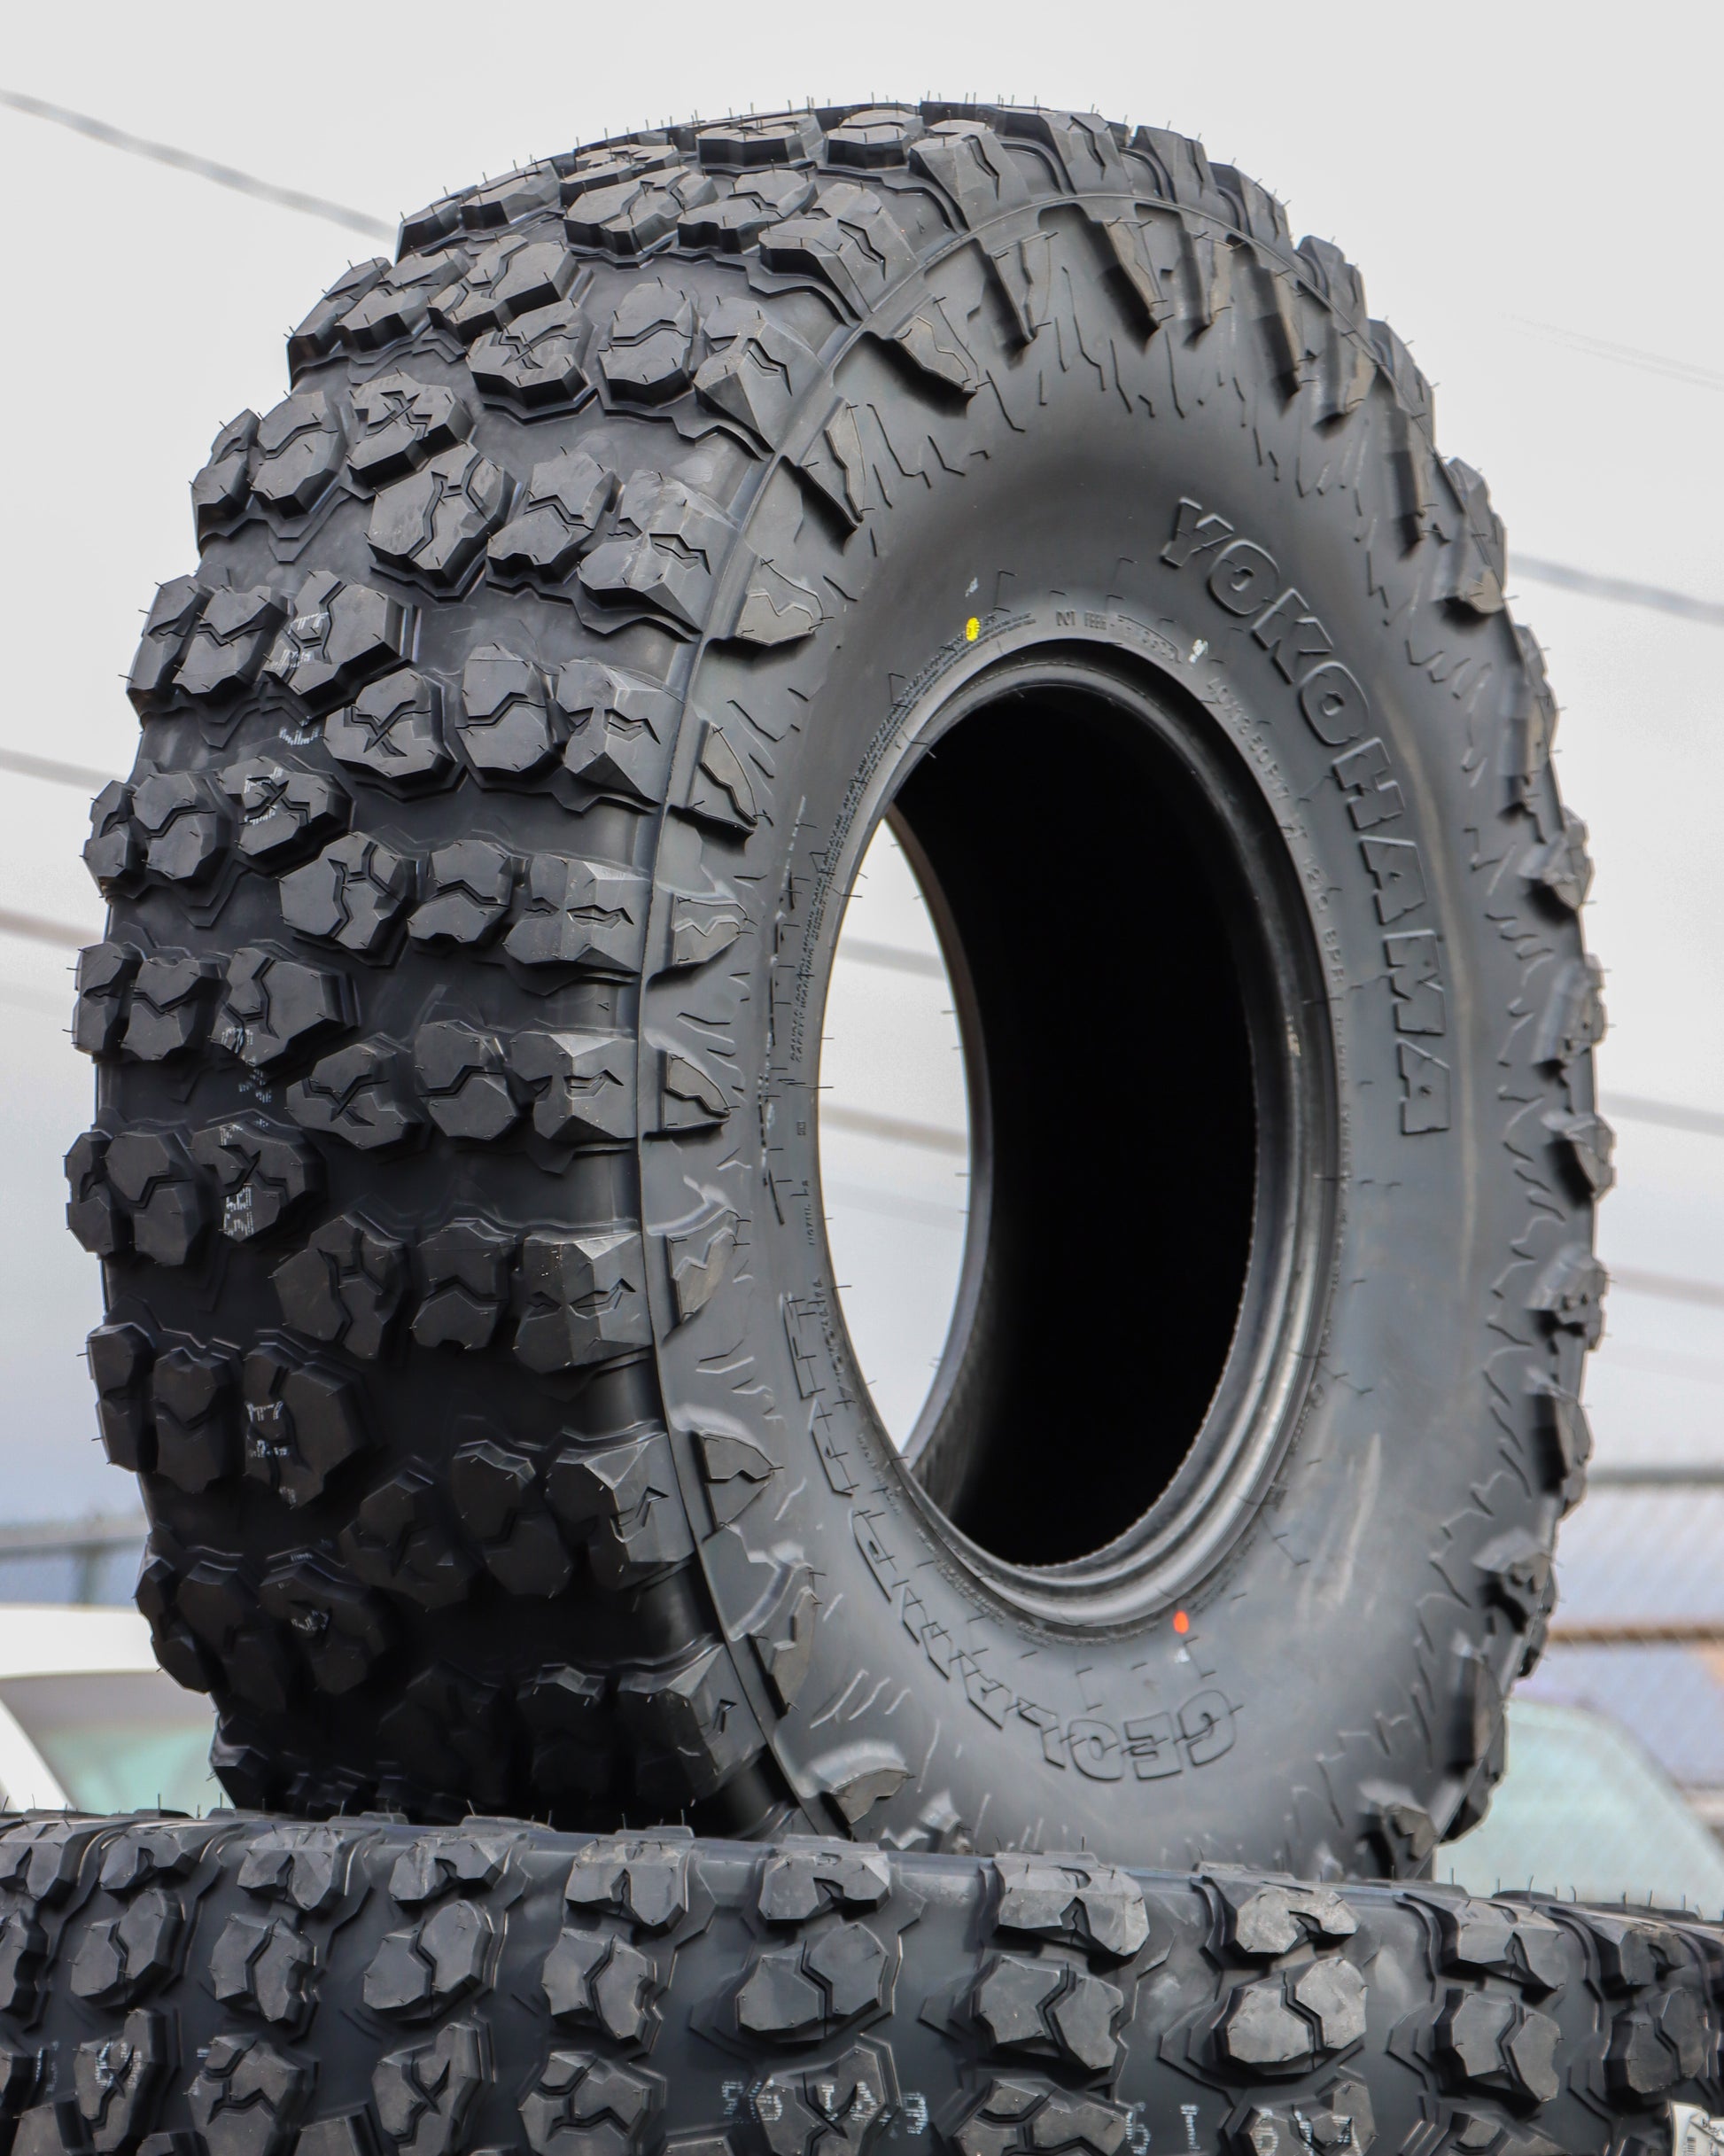 Yokohama Geolandar x-mt tire stacked up on other tires showing off the sidewall and tread of the tire.